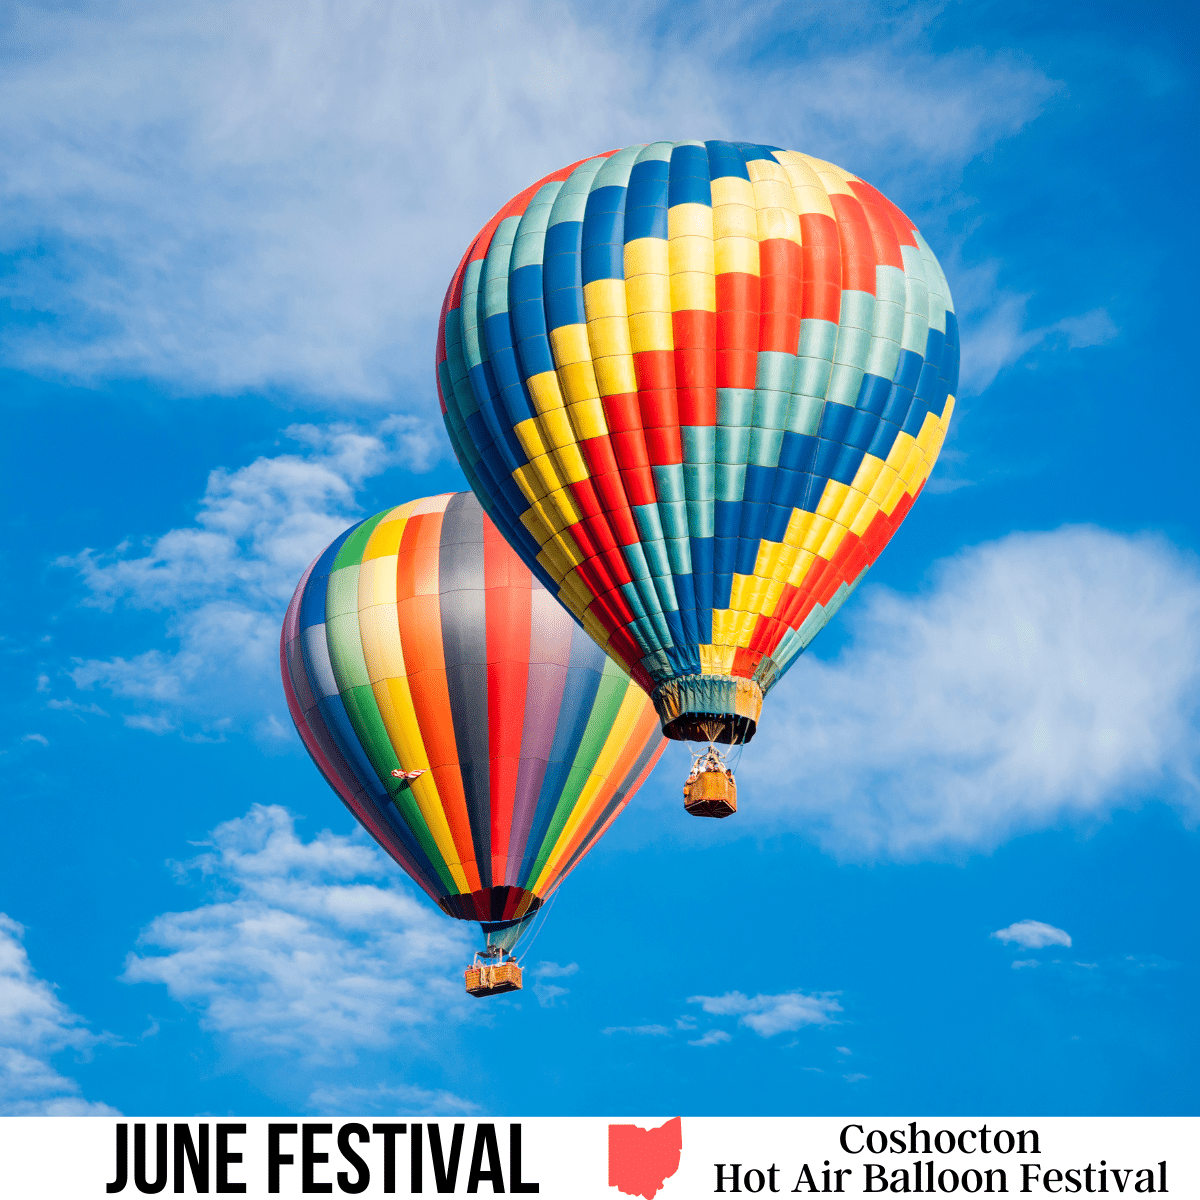 A square image of a photo of two multi-colored hot air balloons against a blue sky background with white clouds. A white strip across the bottom has text June Festival Coshocton Hot Air Balloon Festival.